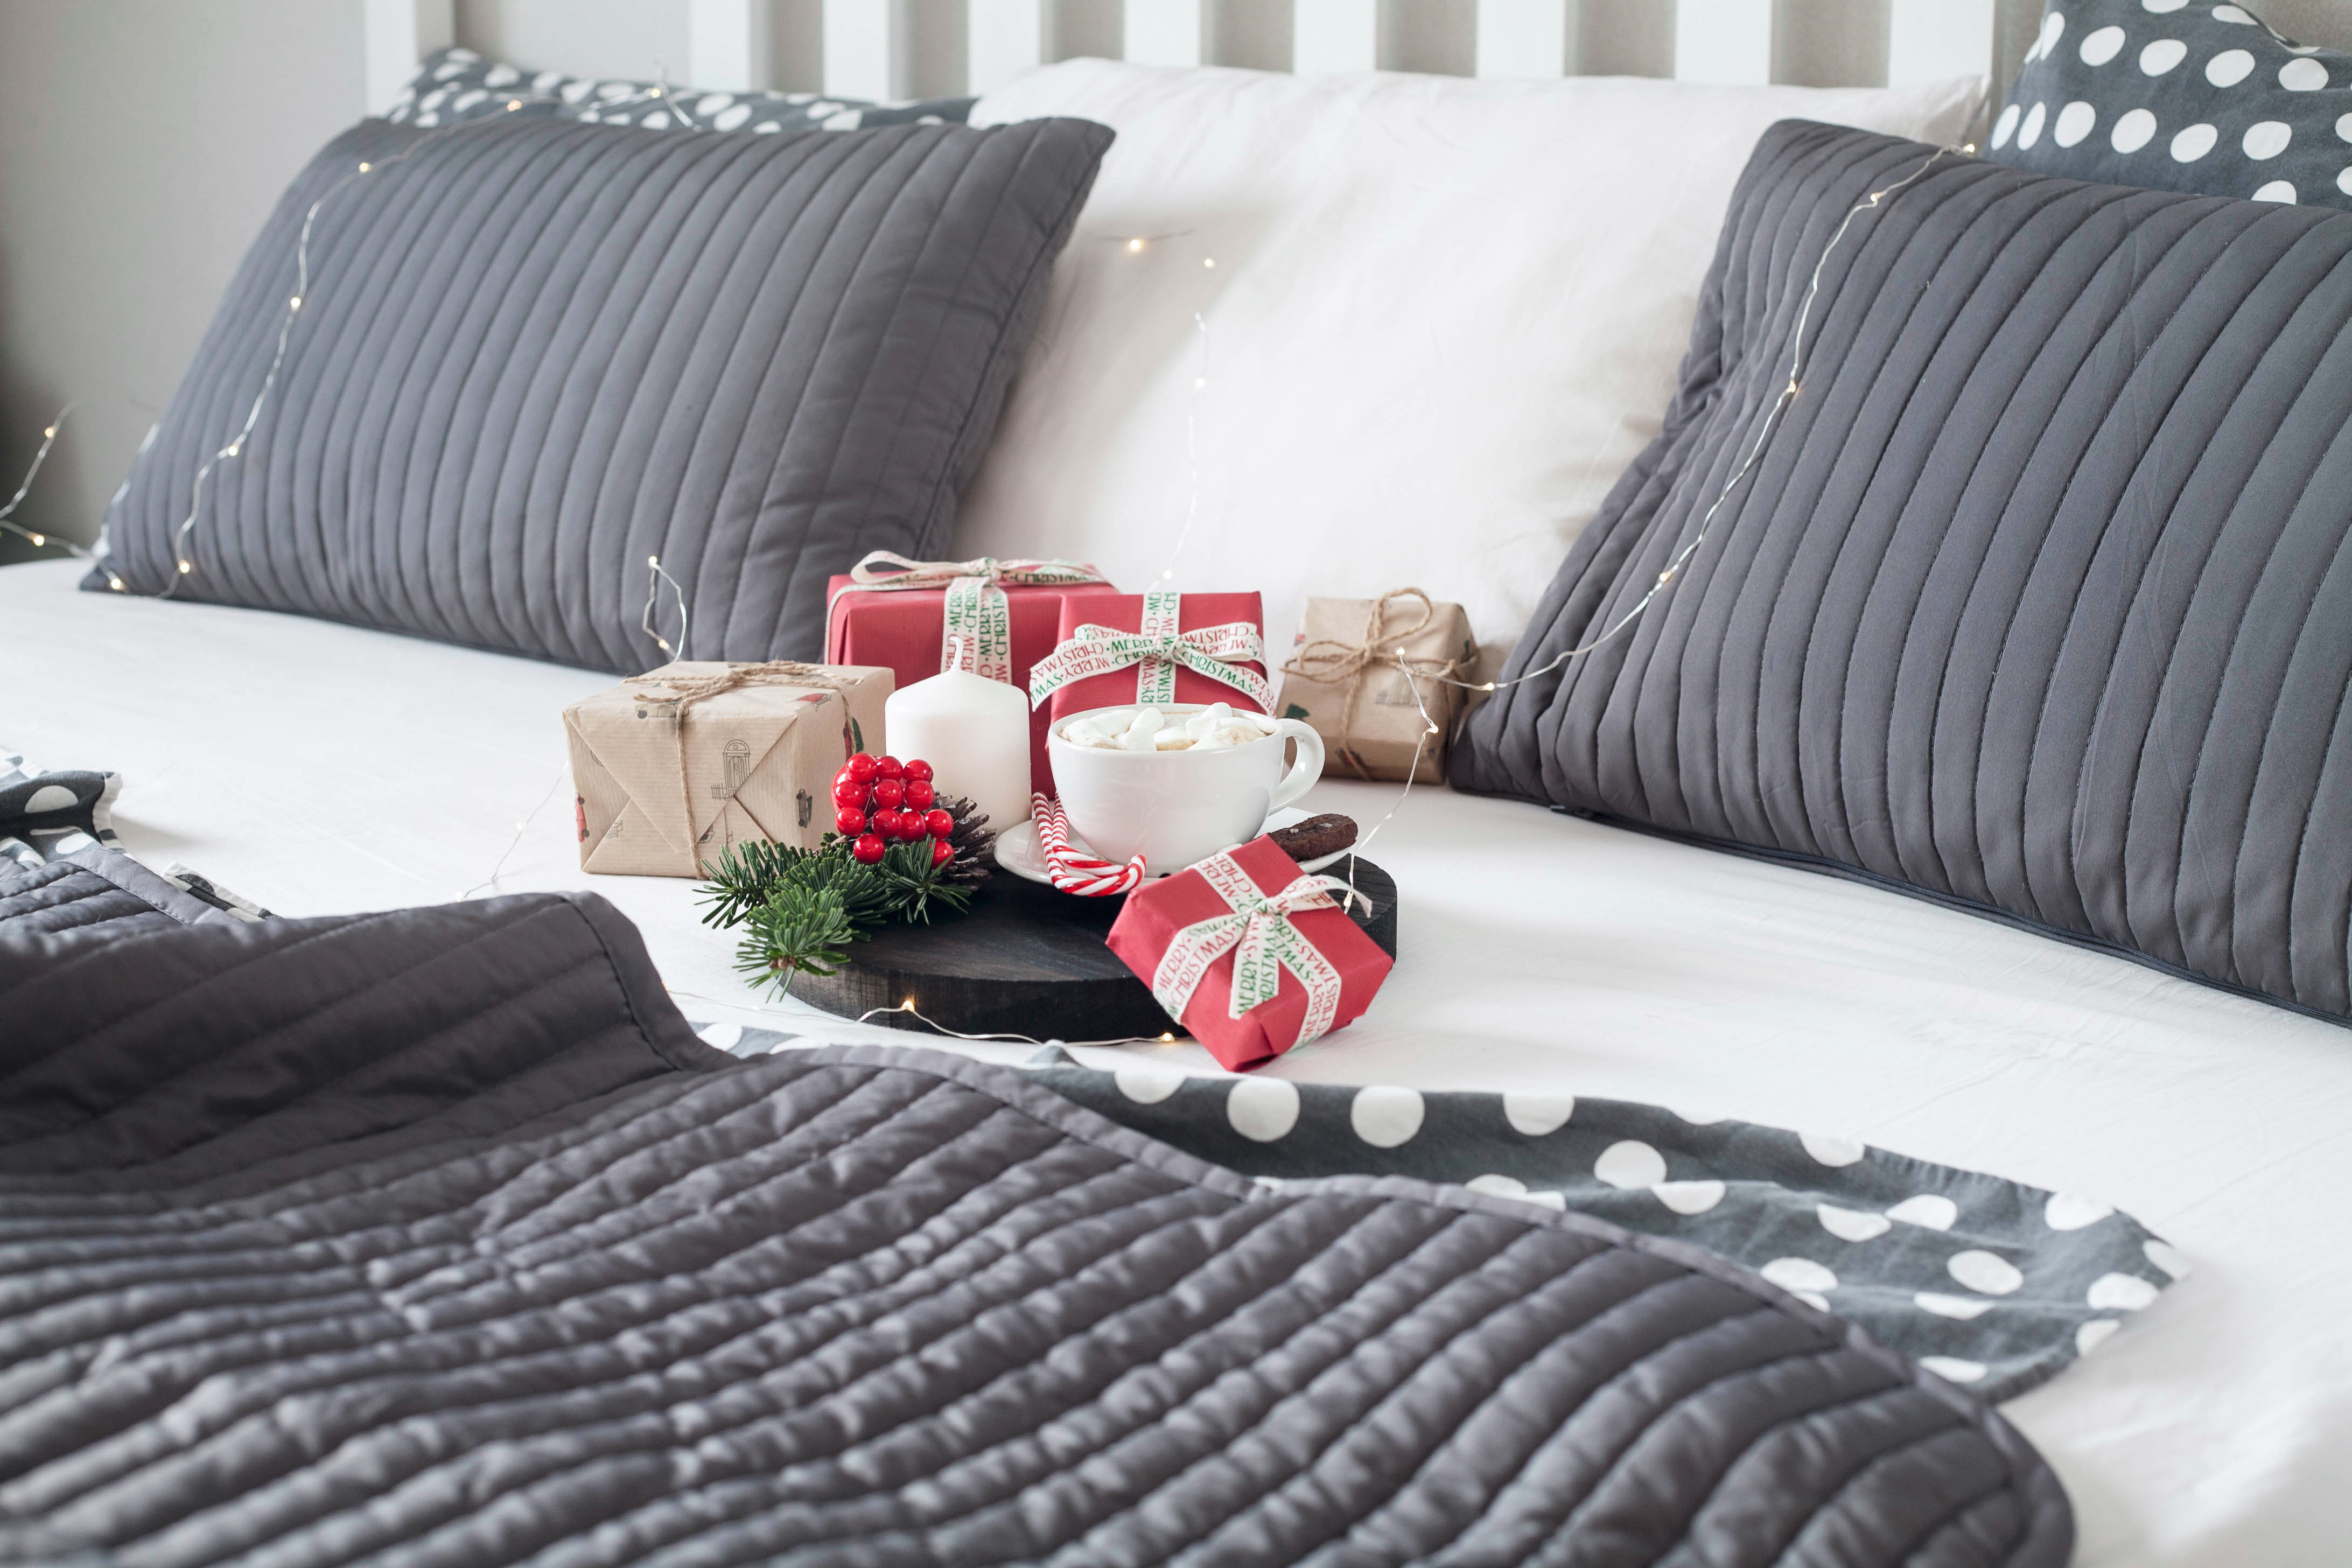 Design Tips For Decorating Your Bedroom For Christmas